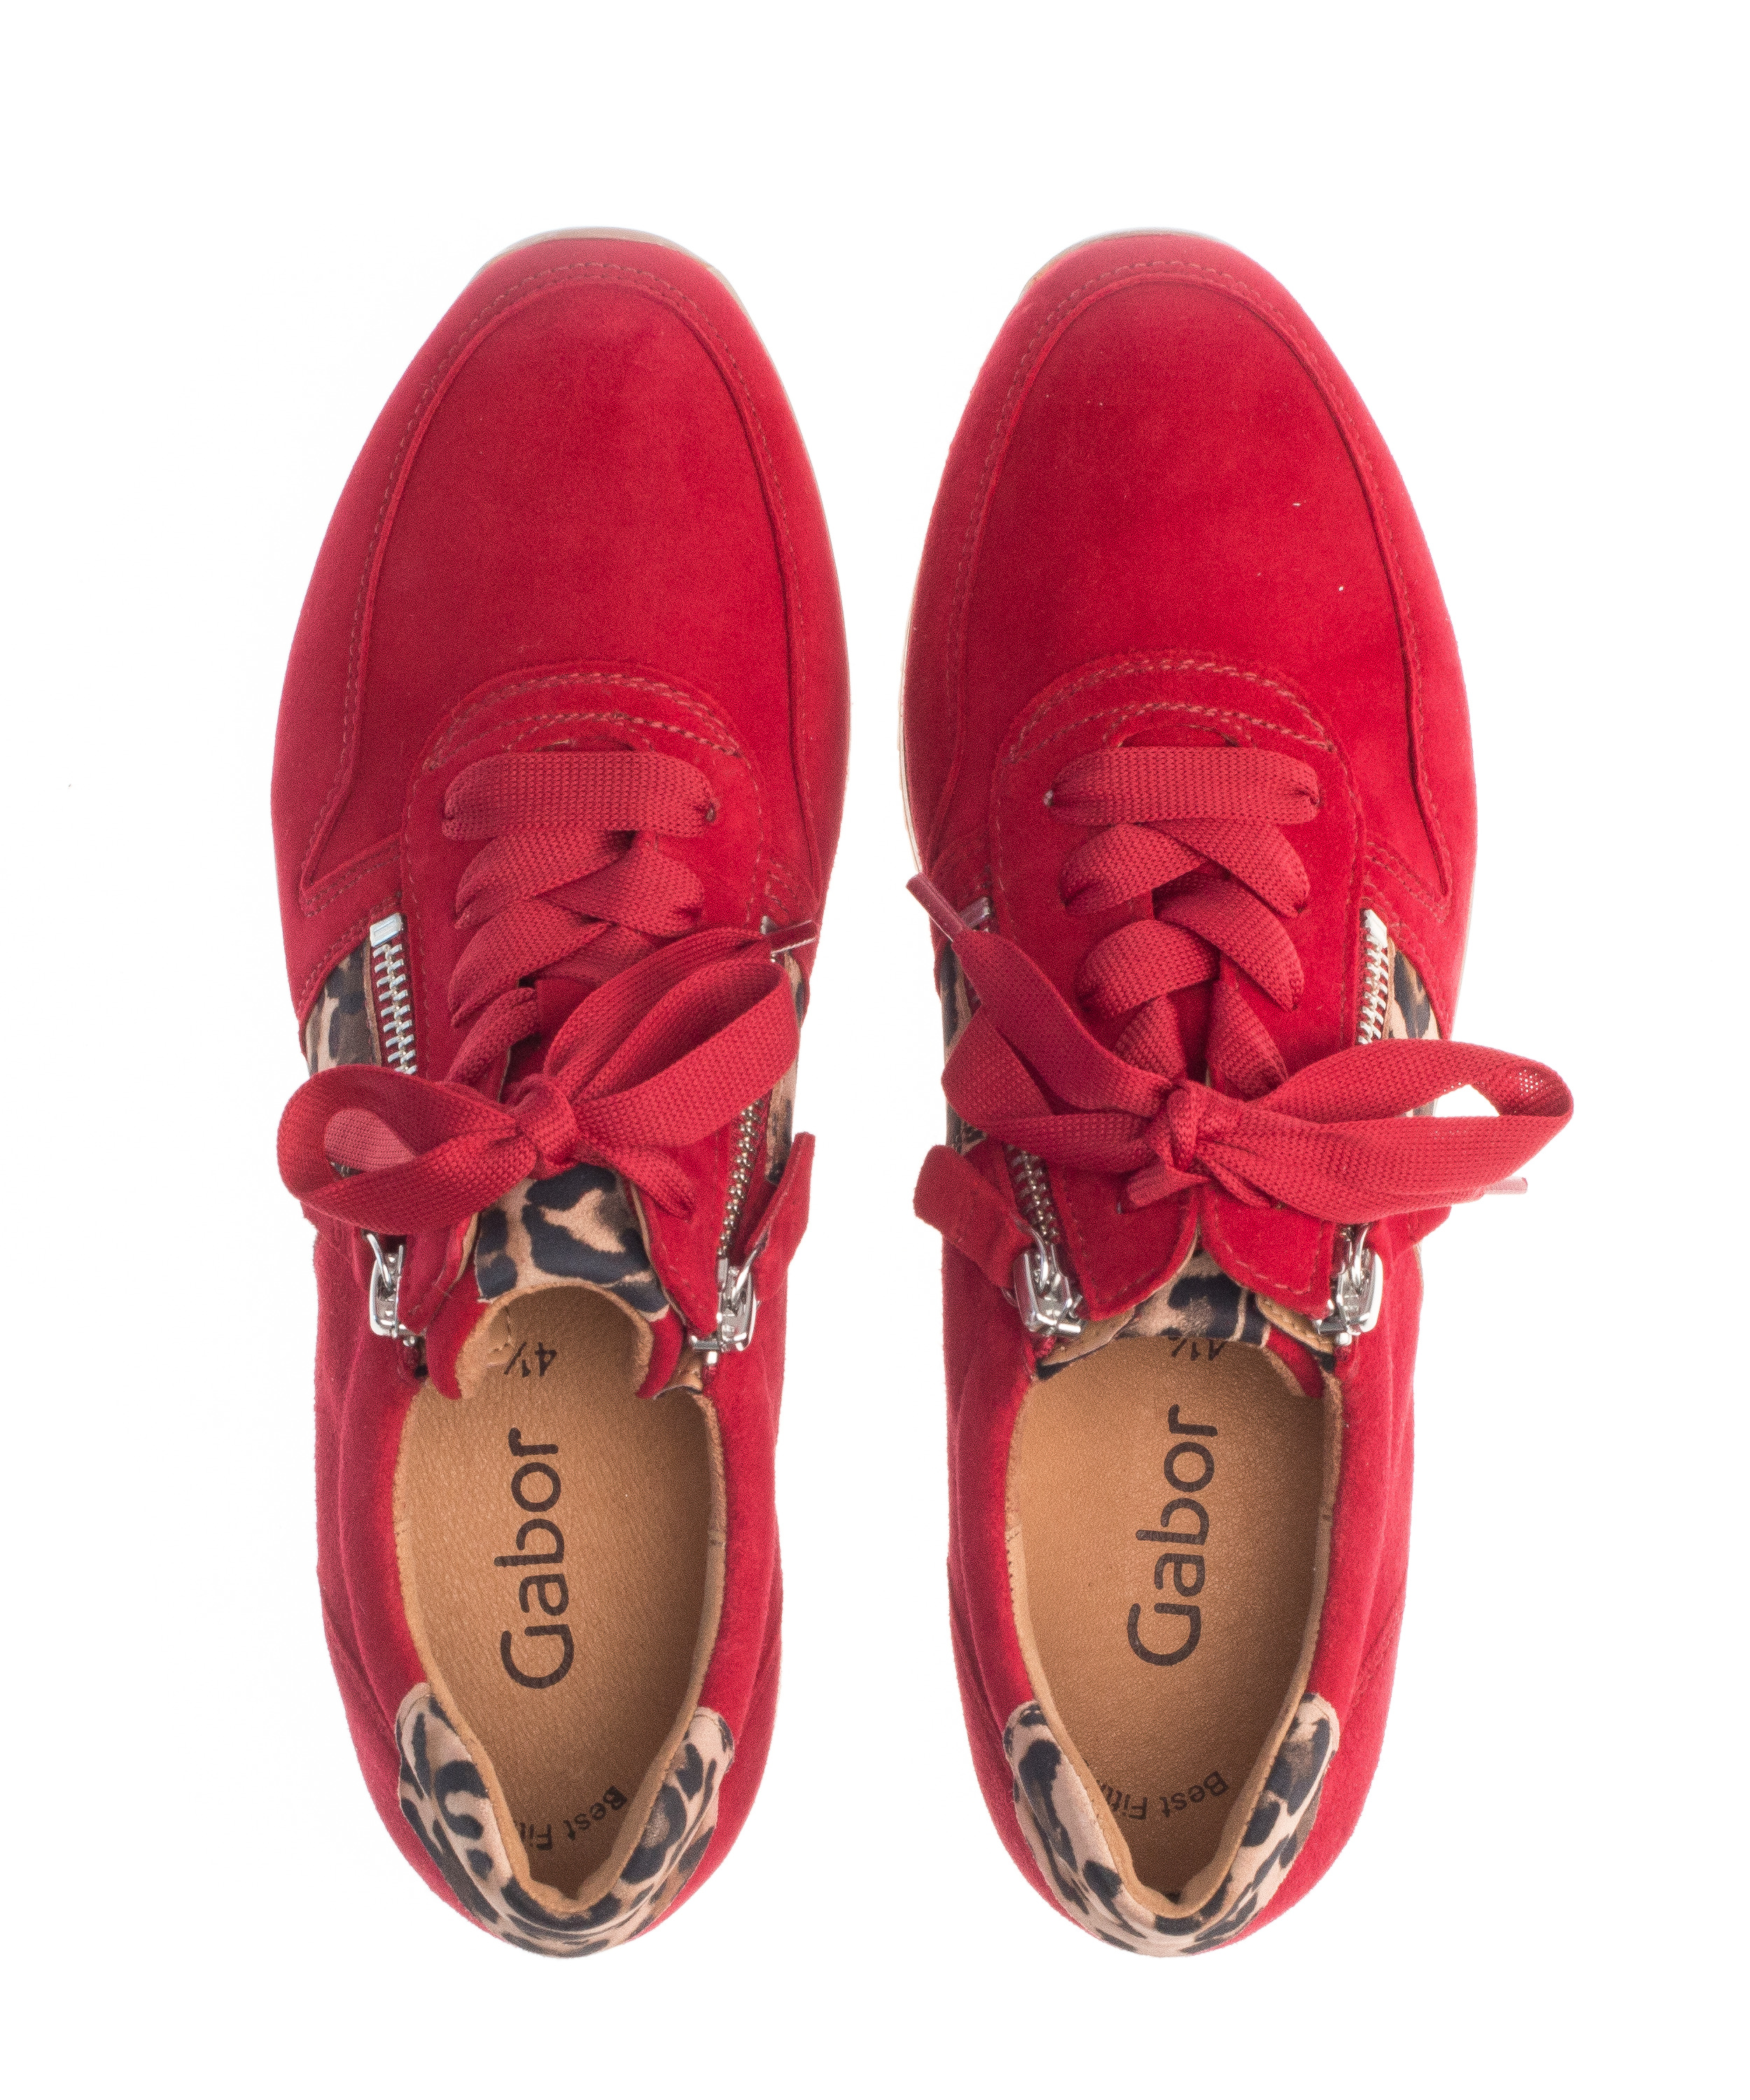 Sneaker Red suede leather